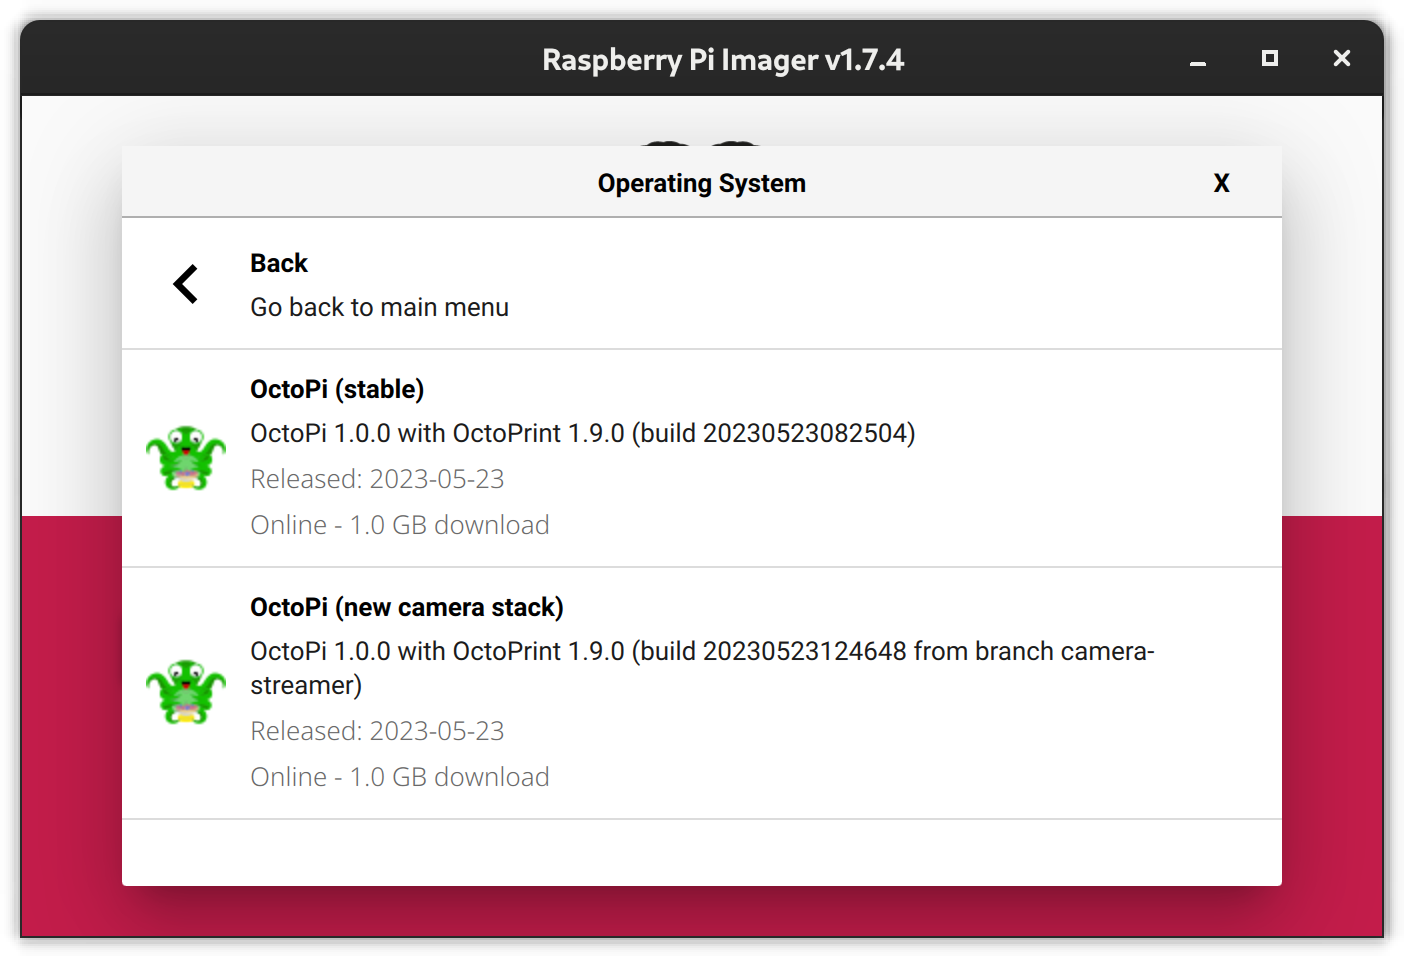 A screenshot of the Raspberry Pi Imager showing the two available download options for OctoPi, "stable" and "new camera stack"